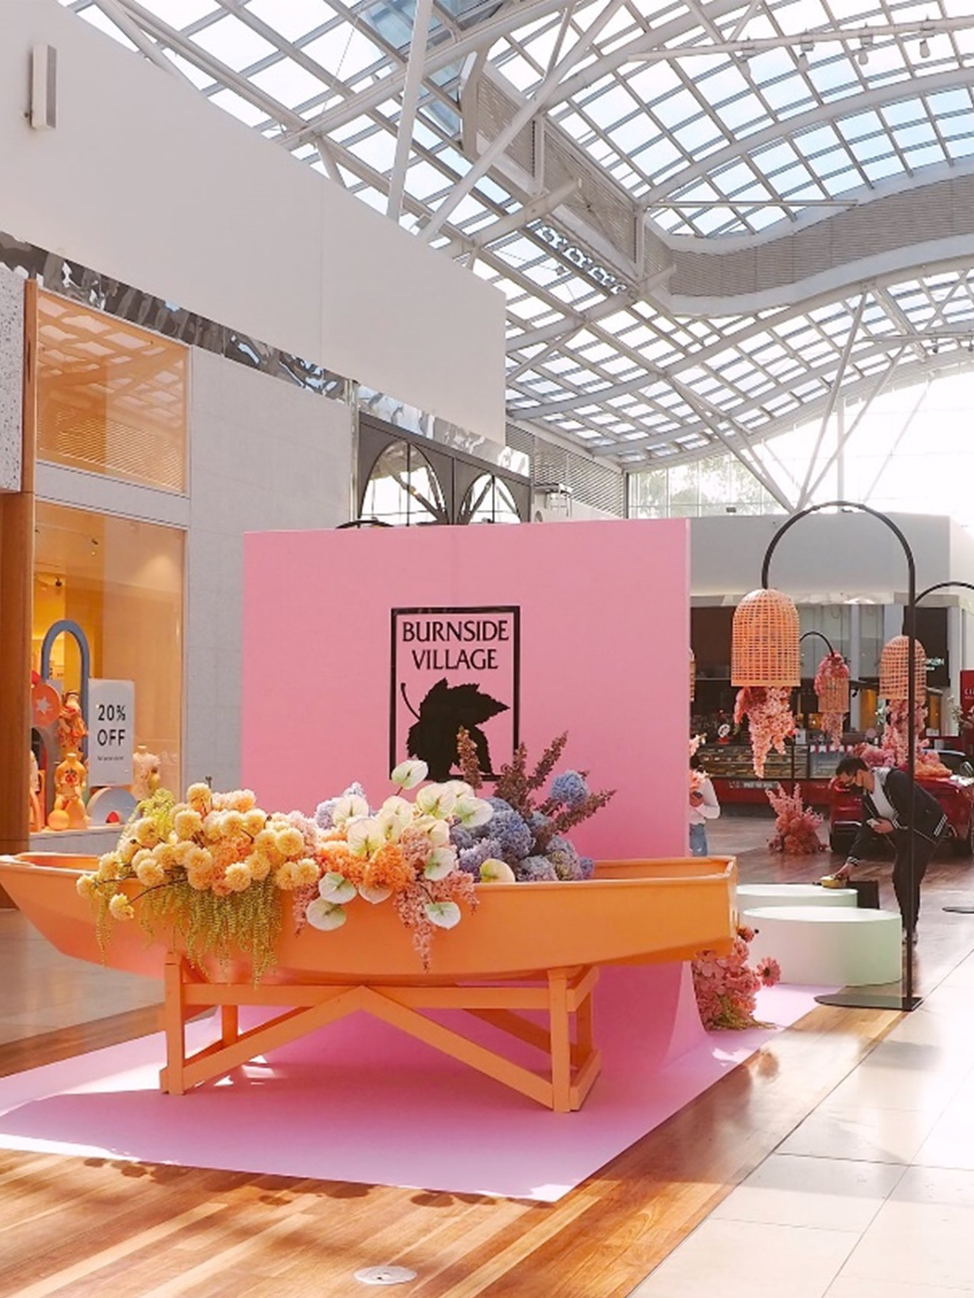 A floral installation Hygge Studio created for the Burnside Village Shopping Centre. Source.